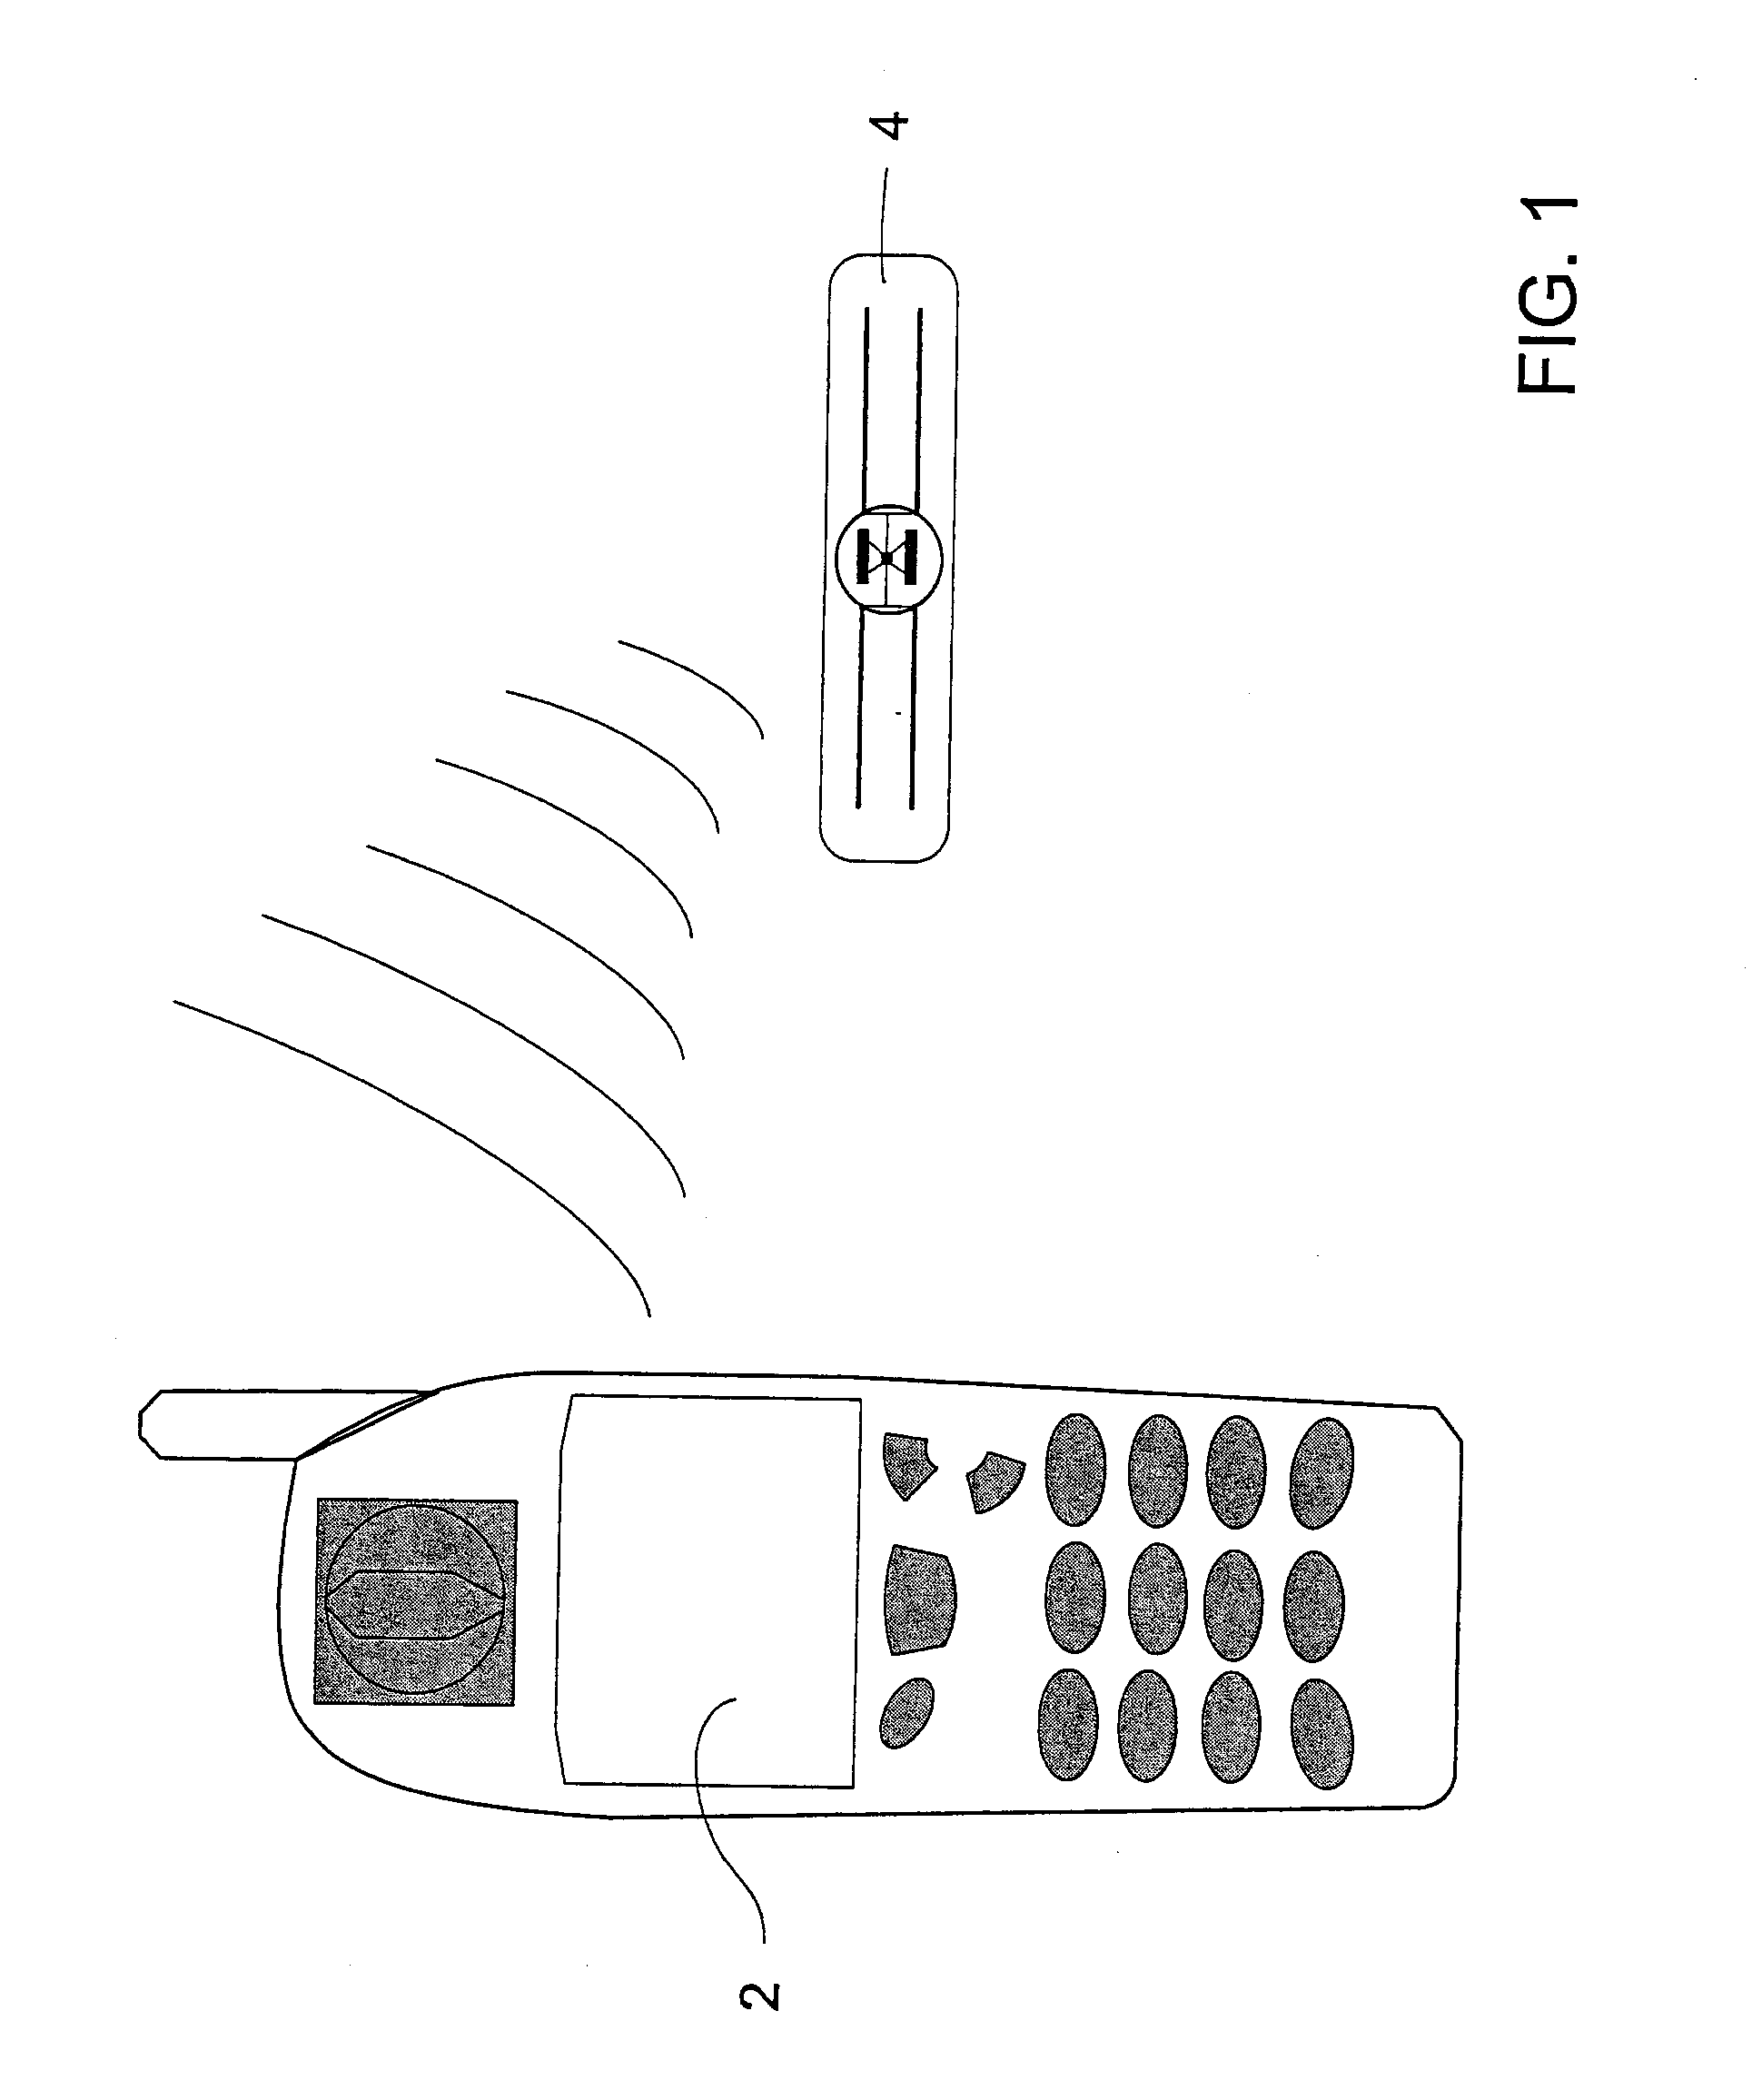 Diagnostic Radio Frequency Identification Sensors And Applications Thereof